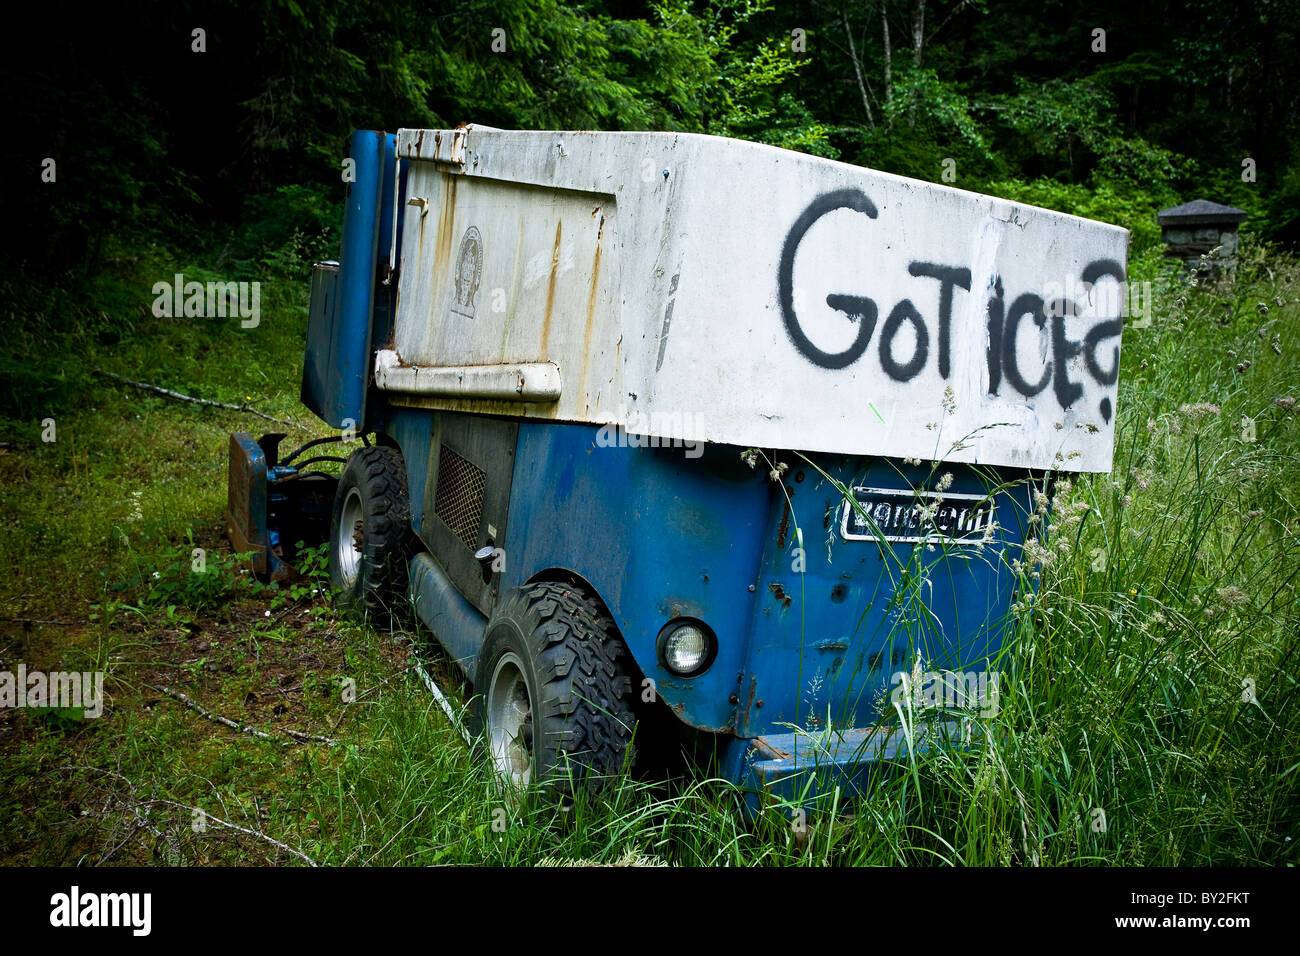 broken-down-zamboni-ice-machine-in-the-woods-with-got-ice-spray-painted-BY2FKT.jpg